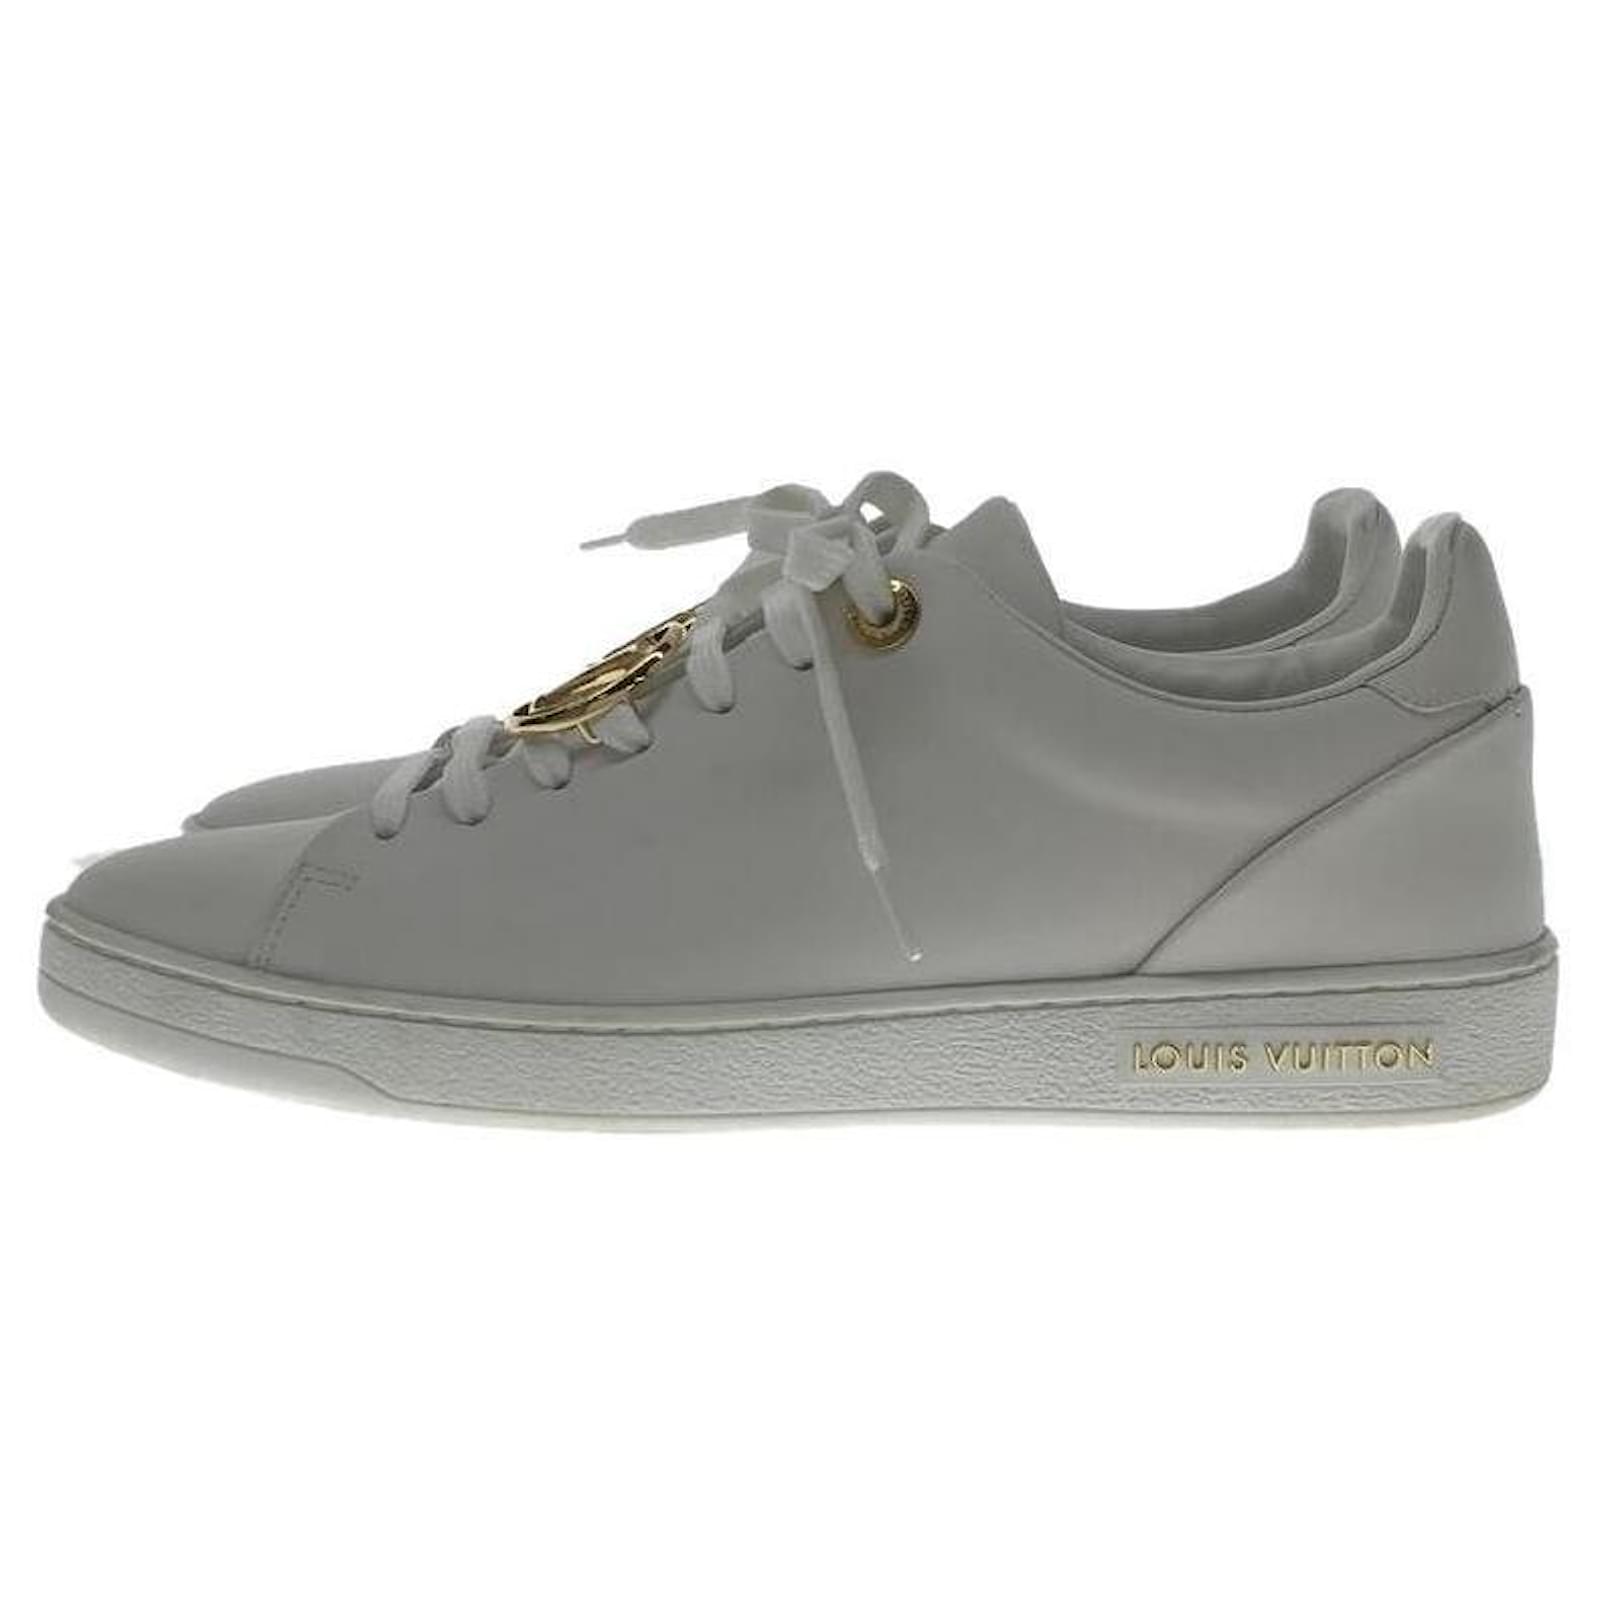 LOUIS VUITTON sneakers front low line / 36.5 / white / cowhide